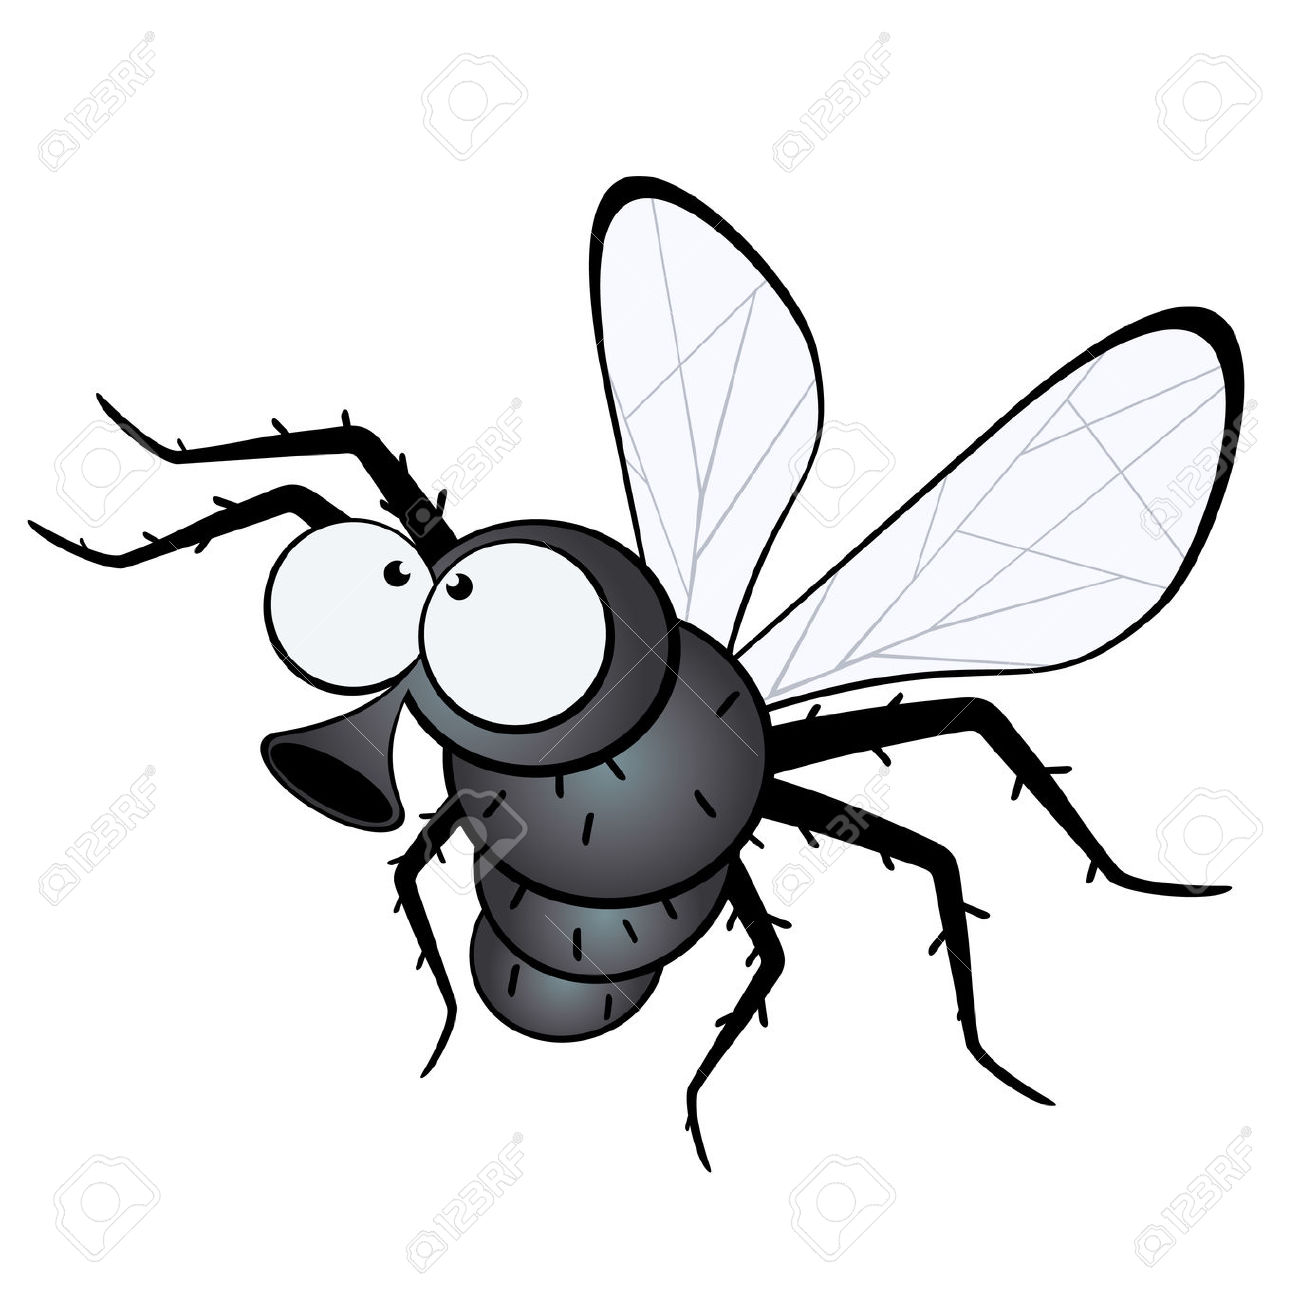 fly clipart - photo #27